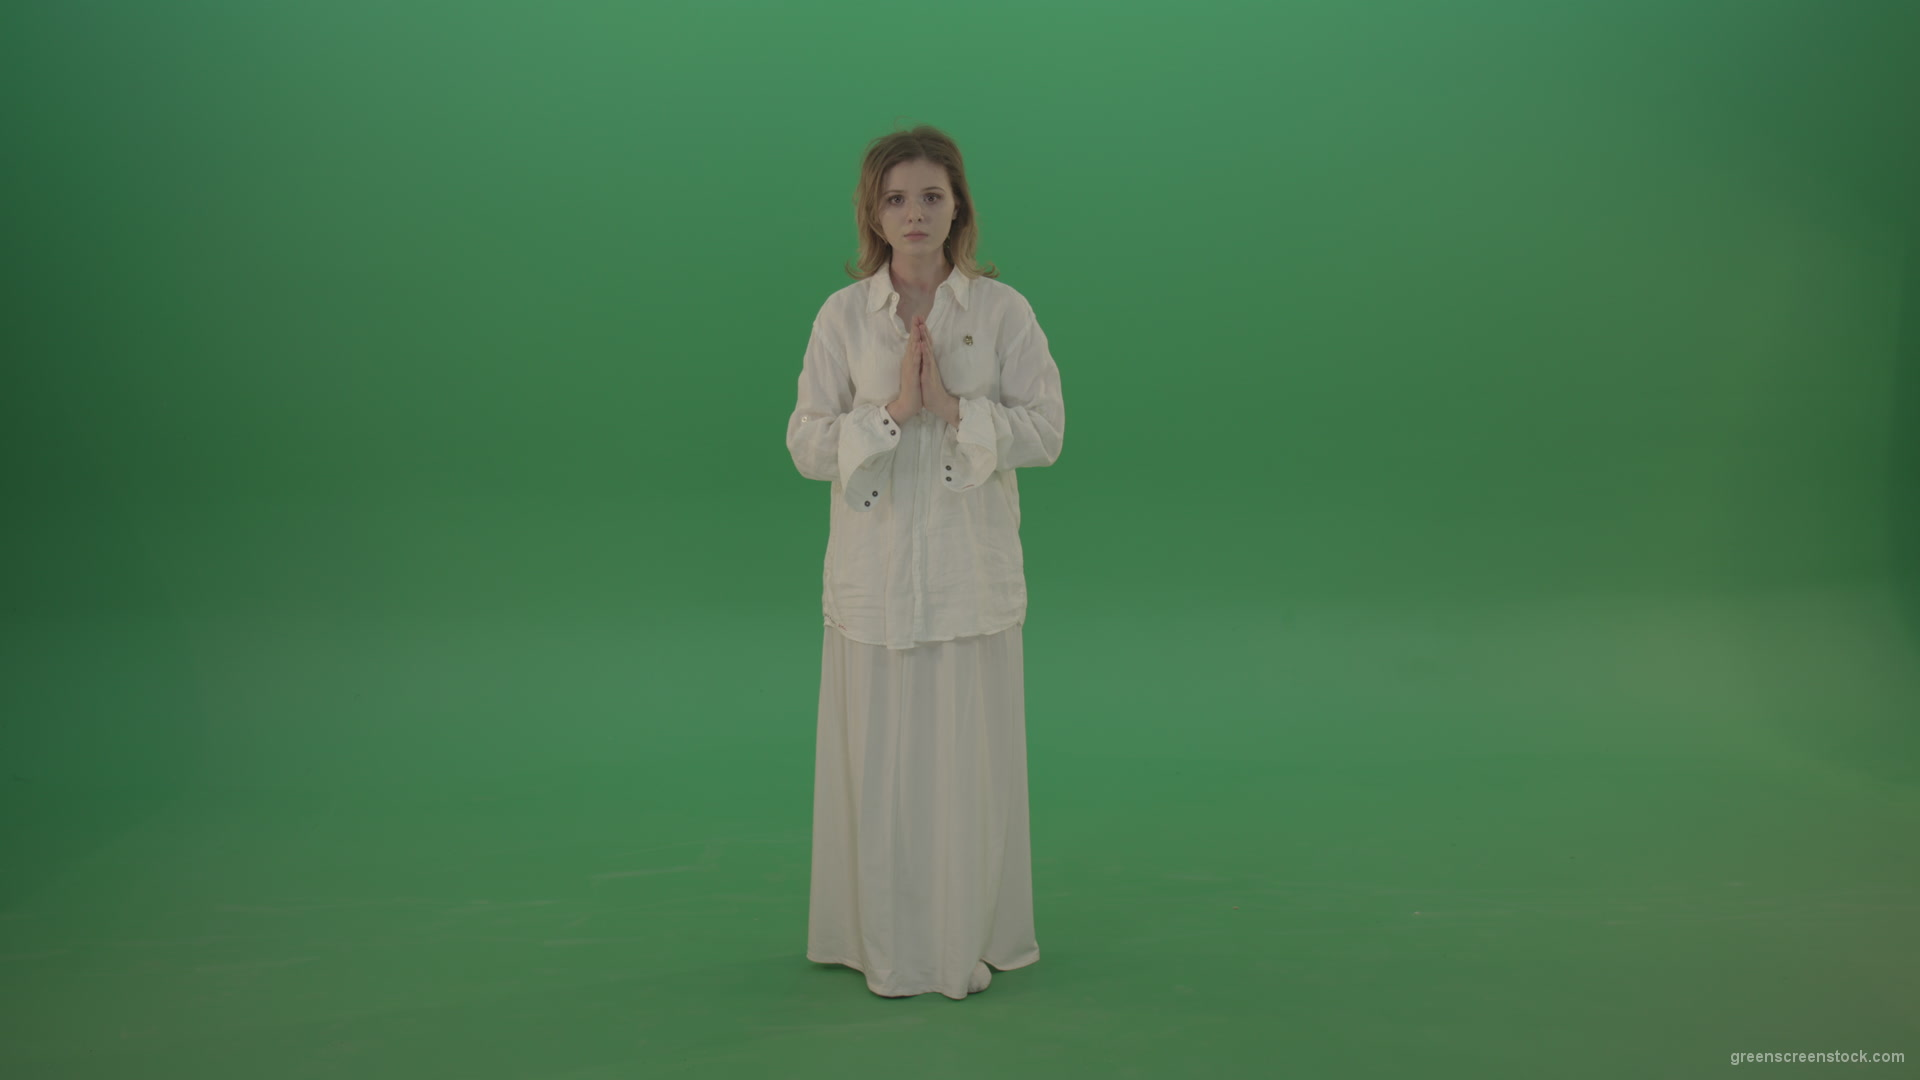 Girl-wearing-a-white-suit-pray-to-god-isolated-on-green-background_002 Green Screen Stock